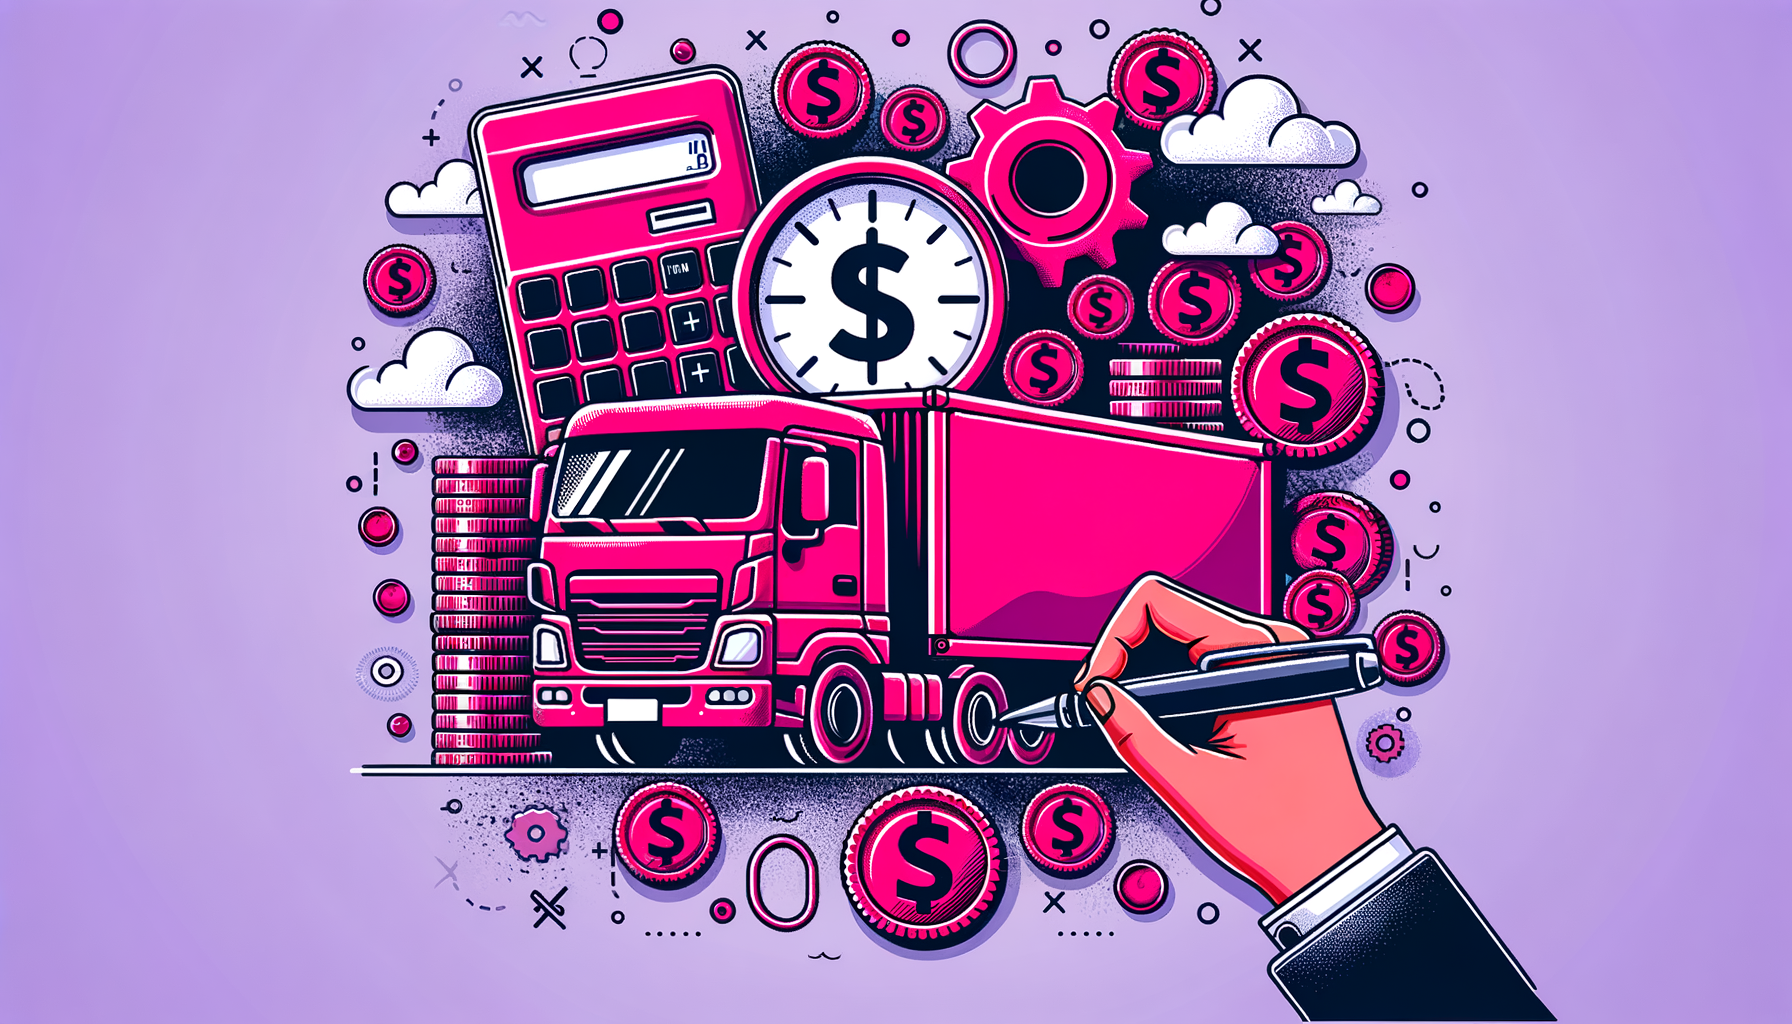 Cartoon illustration of a fuschia-colored balance scale, with dollar signs on one side and an Enterprise truck on the other, representing the assessment of costs versus value in truck rental options.